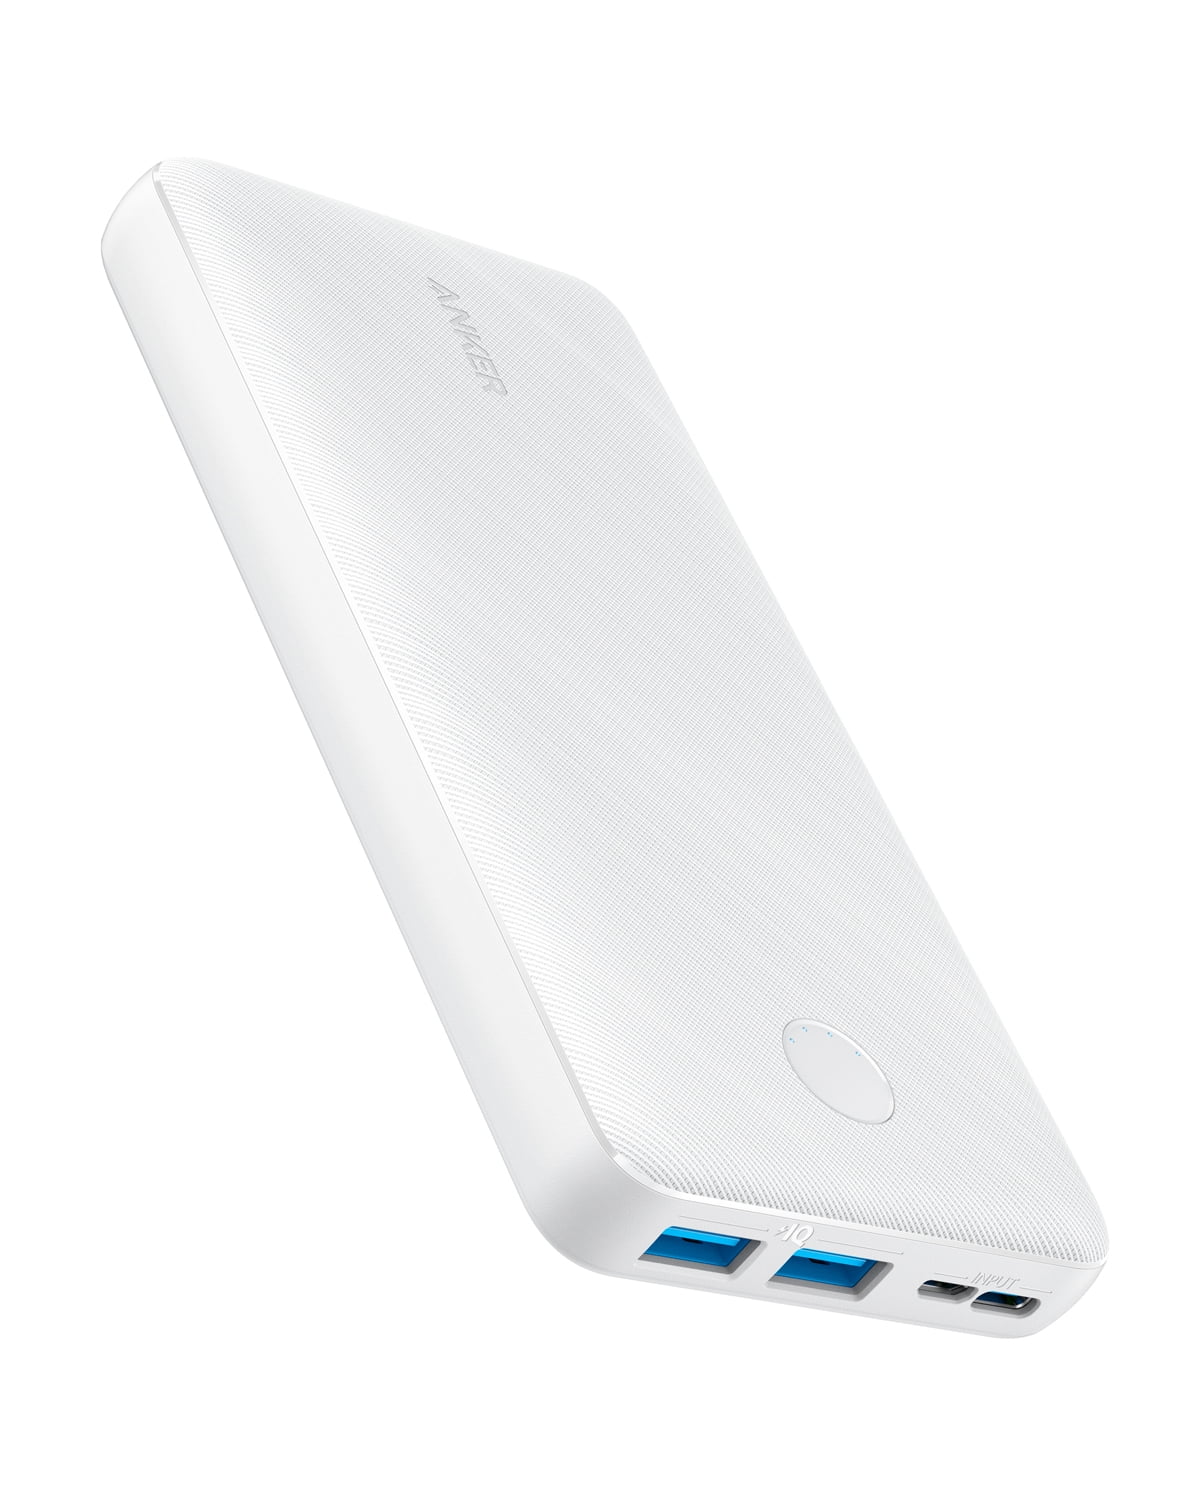 Anker Portable Charger 20000mAh Power Bank 2-Port Battery Pack |PowerCore  Essential 20K|White